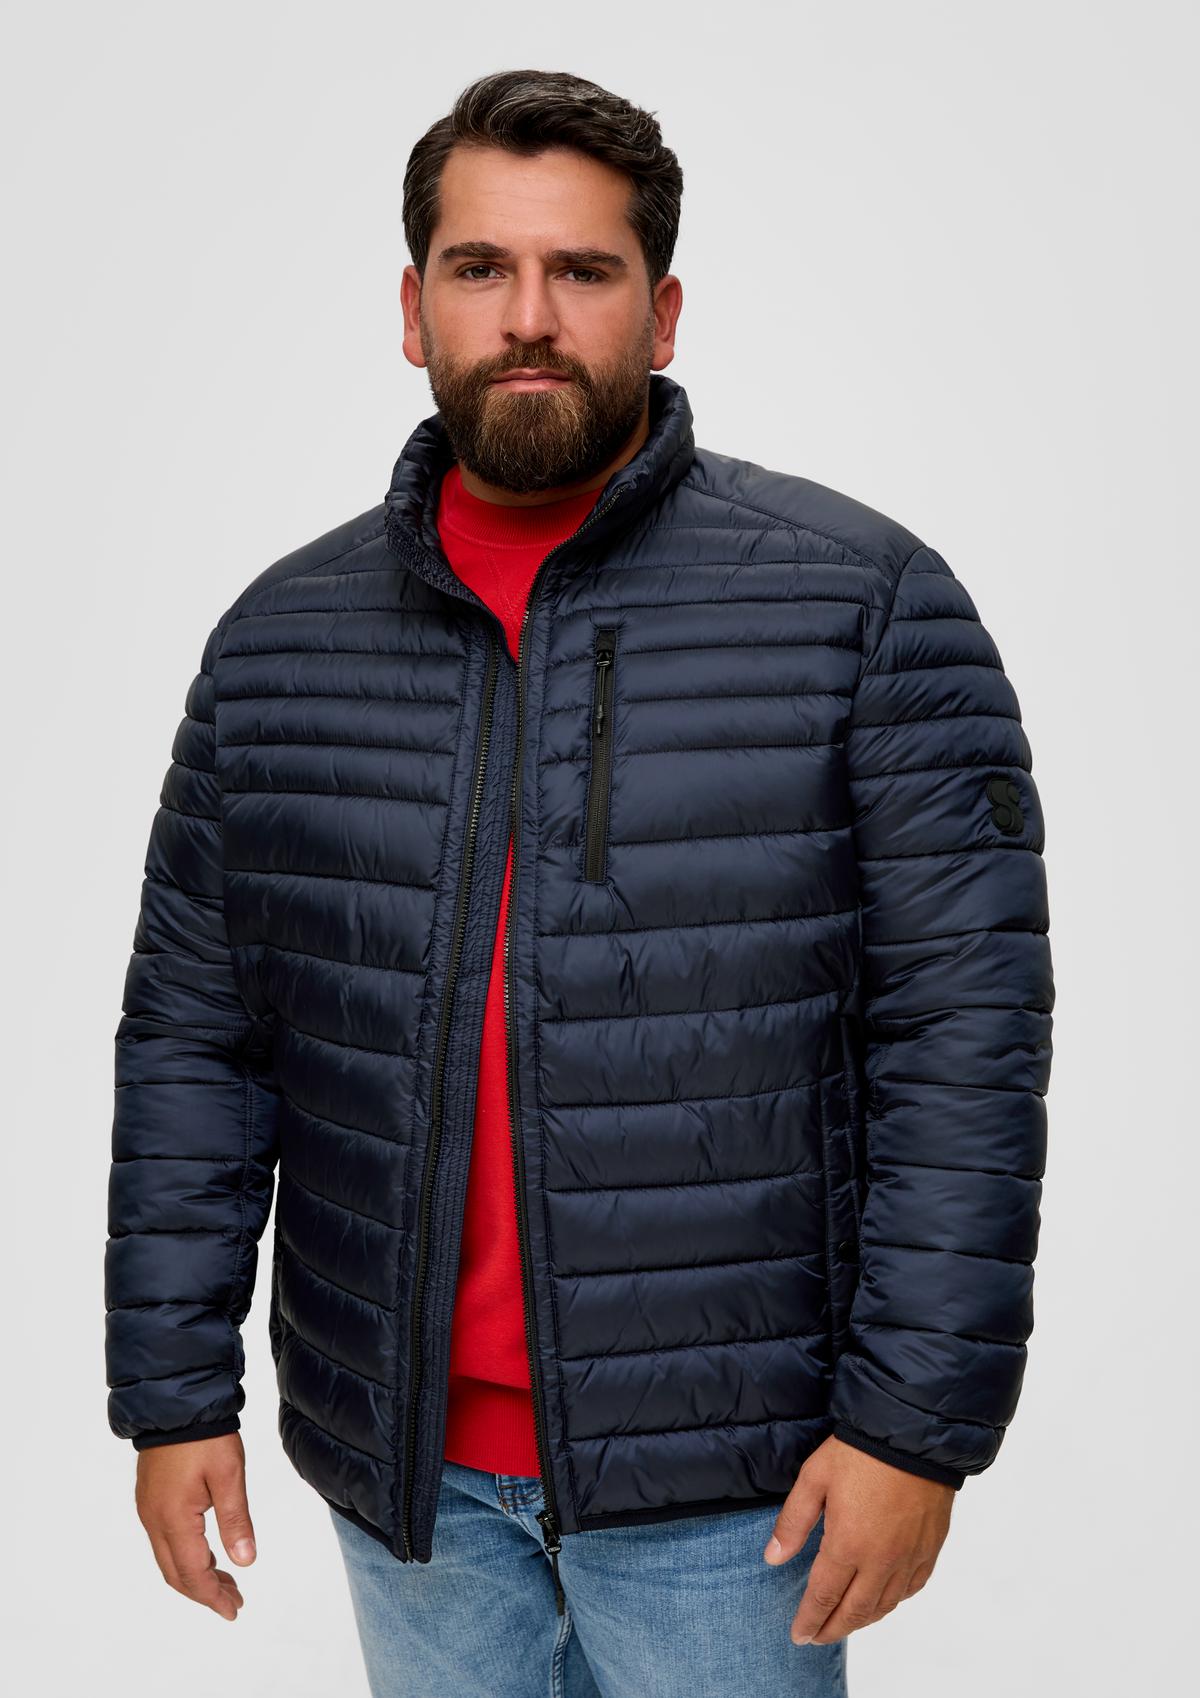 Quilted jacket with a stand-up collar - offwhite